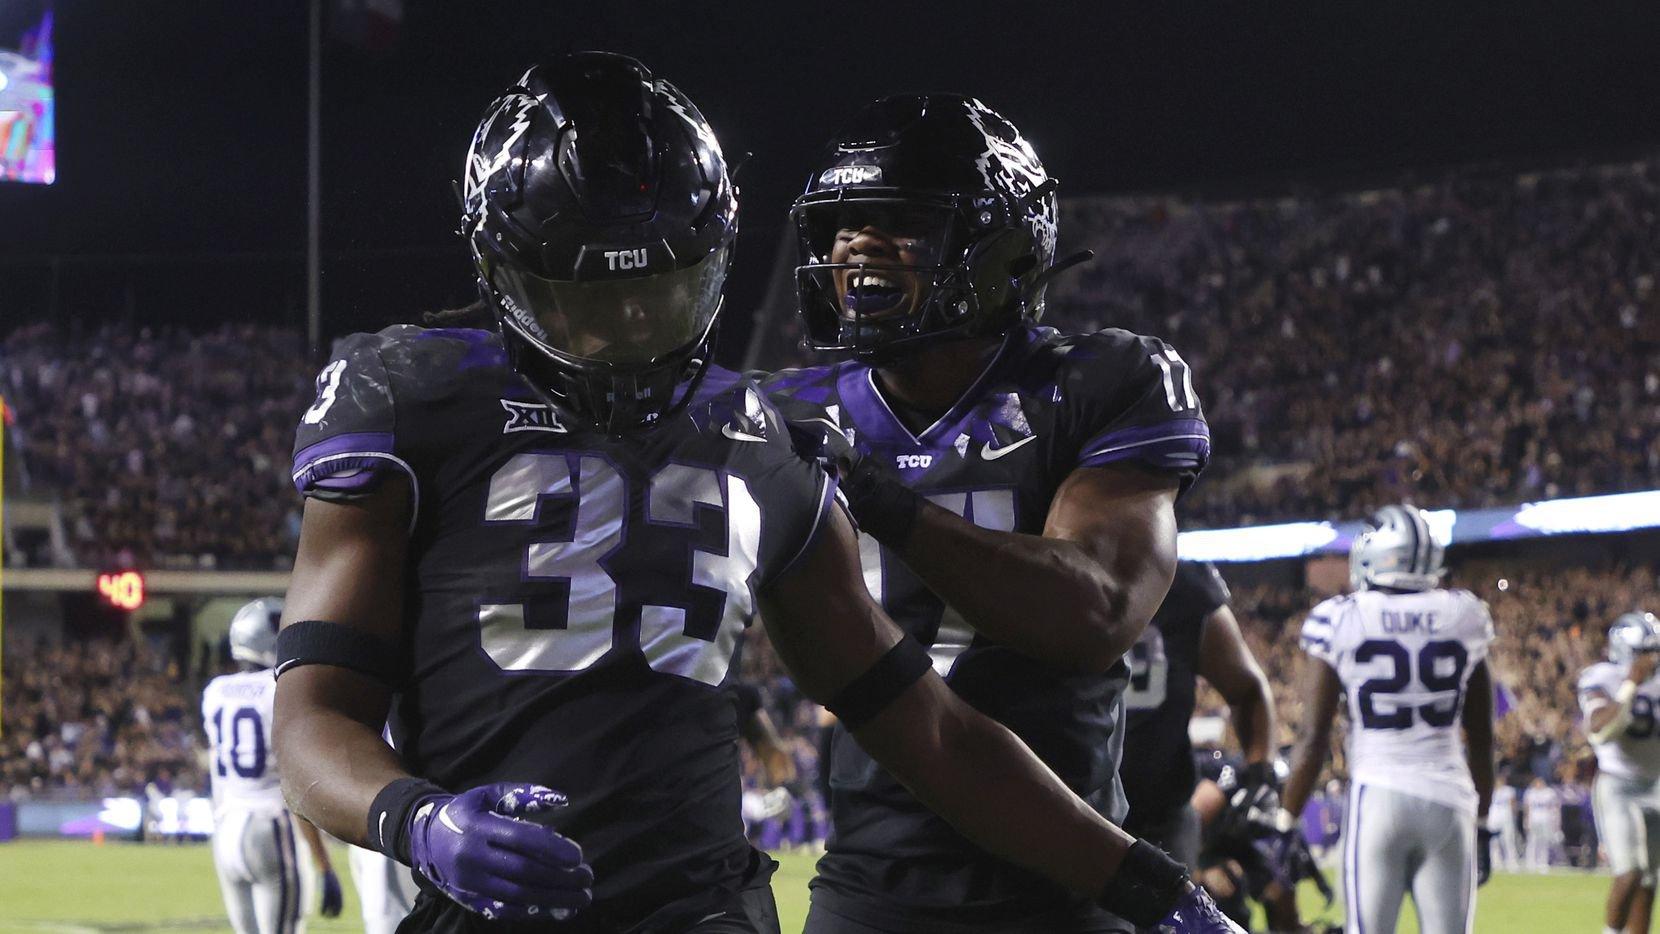 TCU vs. Baylor Football Betting: Will the Horned Frogs fight off the Bears’ upset bid in Waco? cover